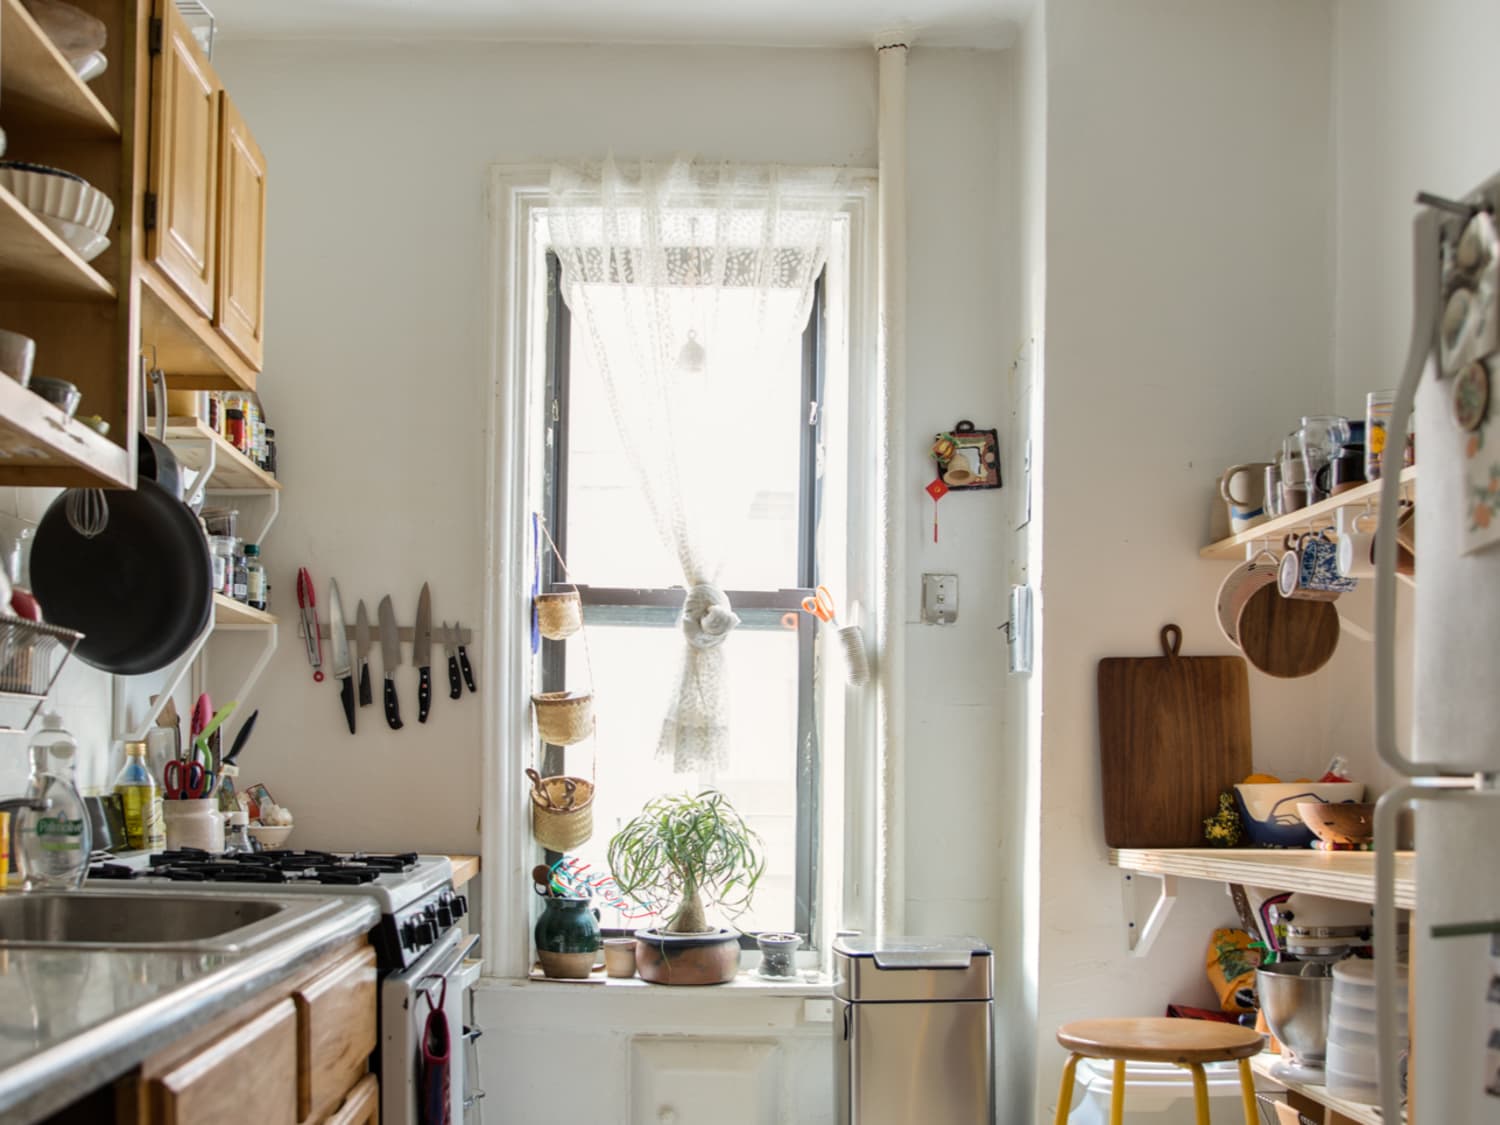 This is where to put a trash can in a small kitchen, according to designers